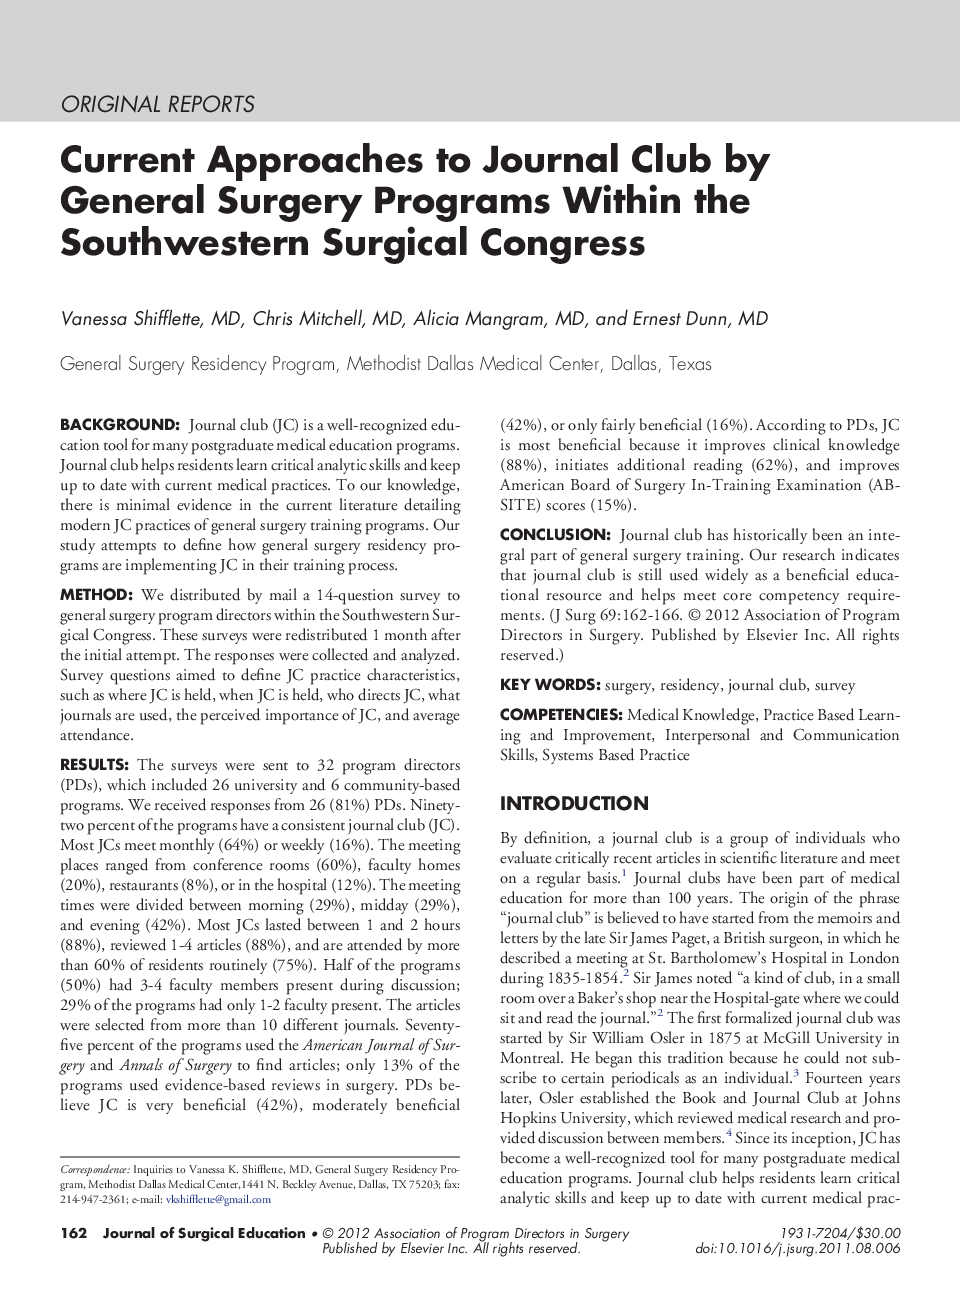 Current Approaches to Journal Club by General Surgery Programs Within the Southwestern Surgical Congress